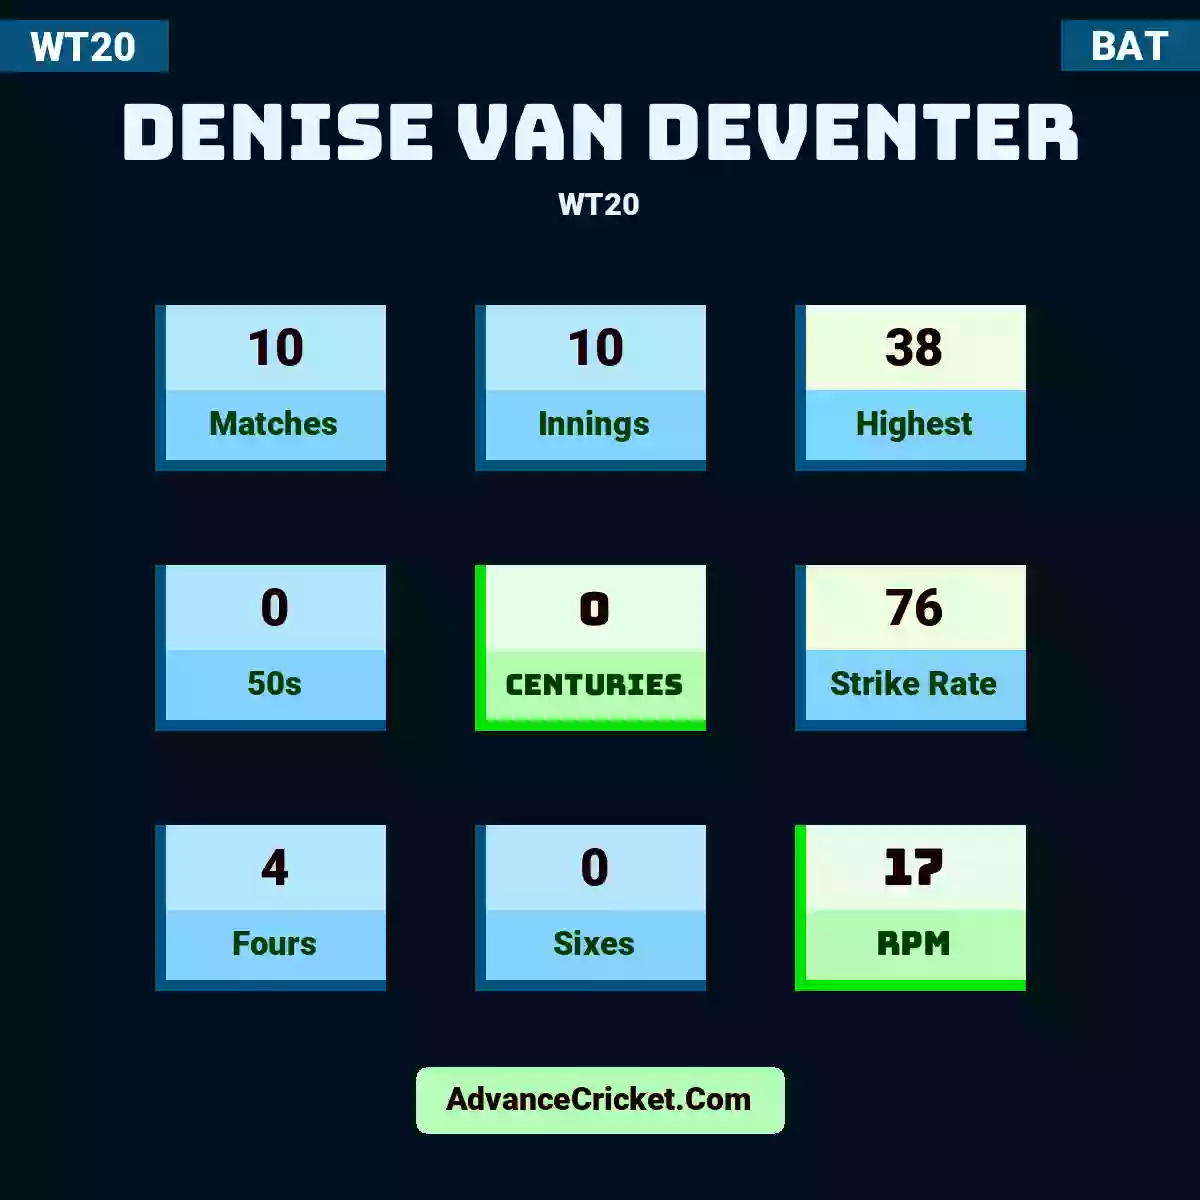 Denise van Deventer WT20 , Denise van Deventer played 10 matches, scored 38 runs as highest, 0 half-centuries, and 0 centuries, with a strike rate of 76. D.Deventer hit 4 fours and 0 sixes, with an RPM of 17.